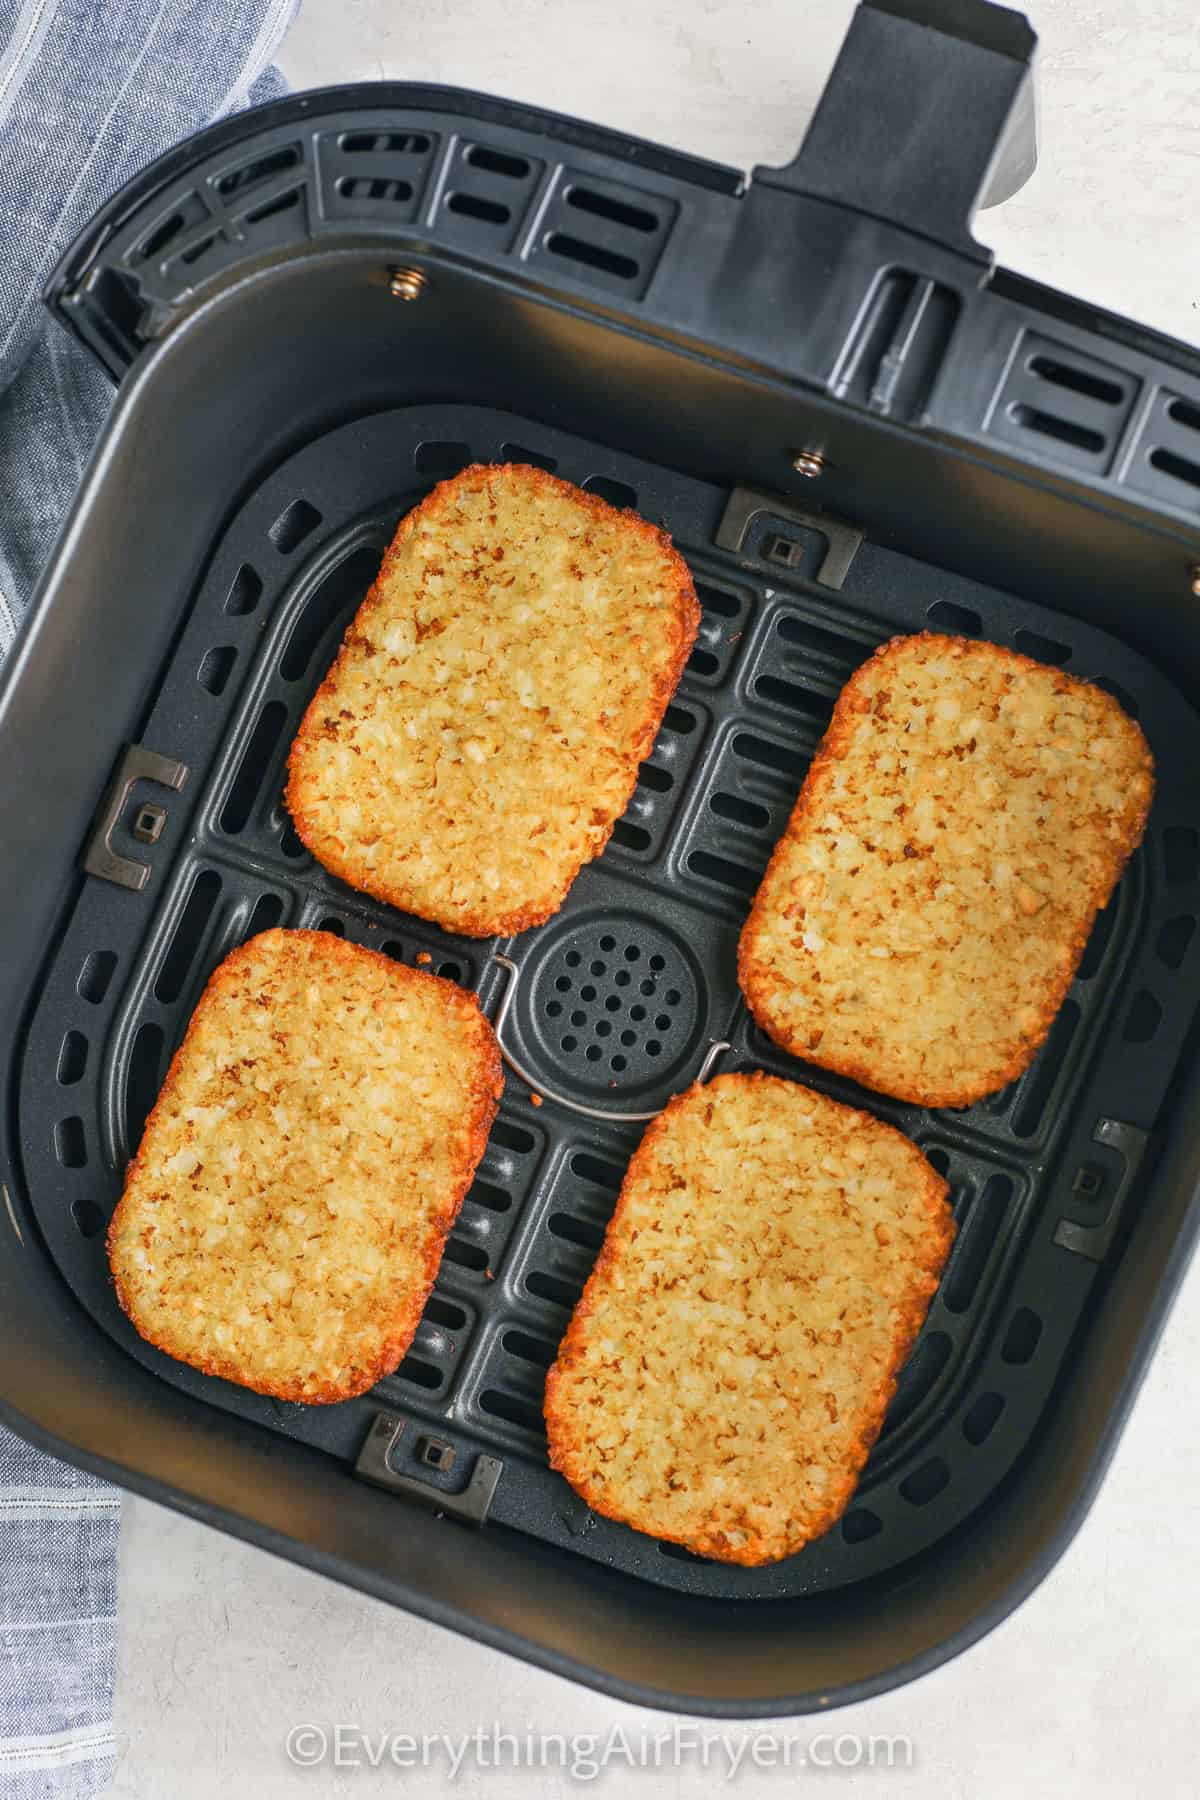 Frozen Hash Browns in the Air Fryer after cooking